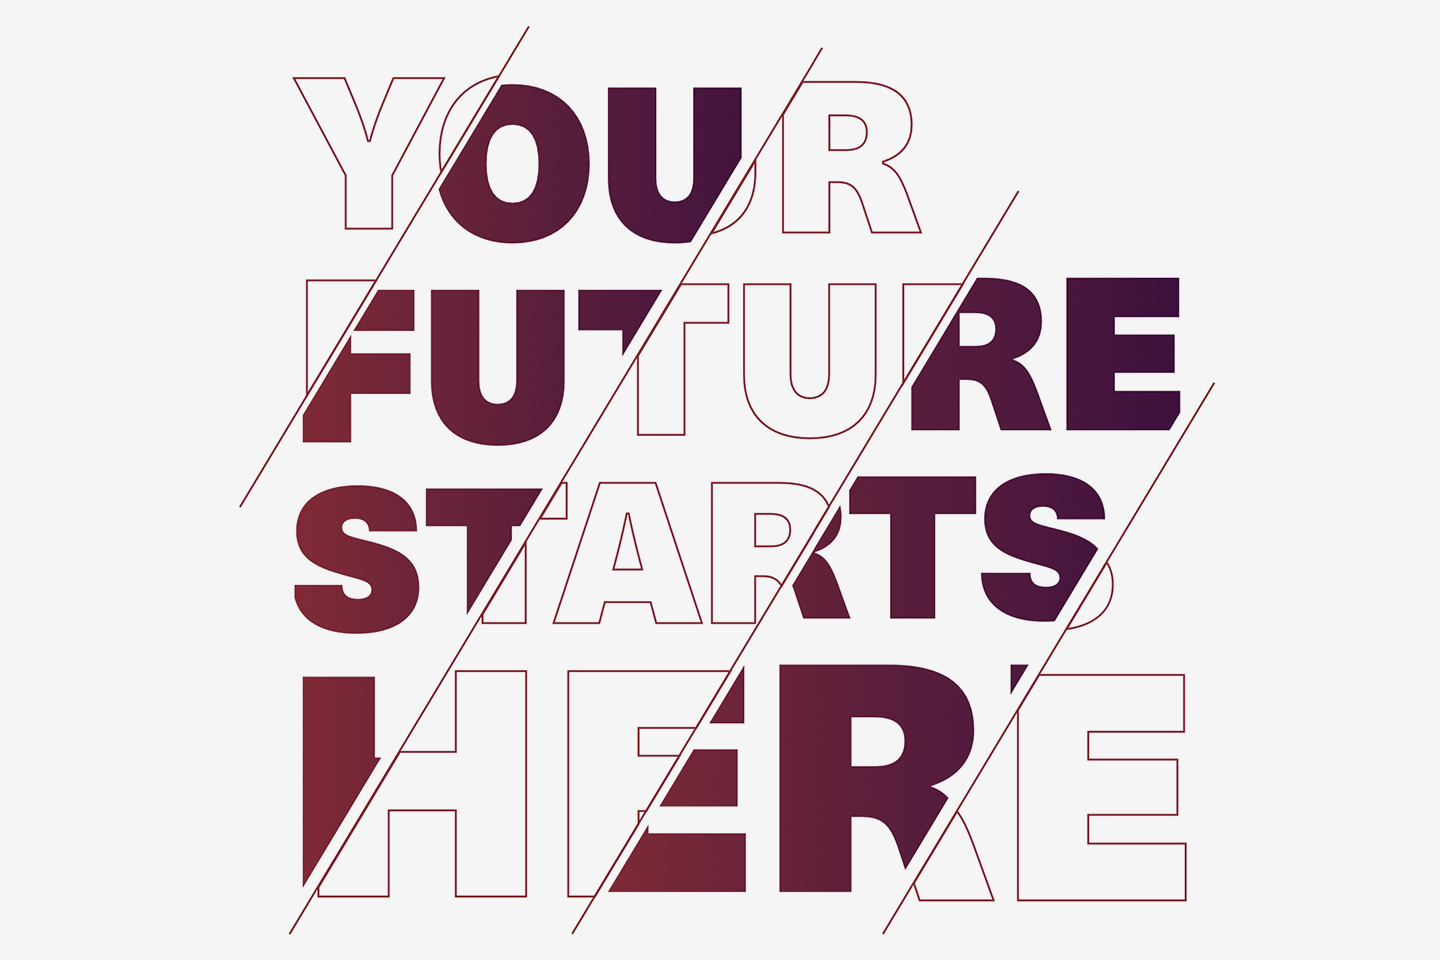 Your Future Starts Here